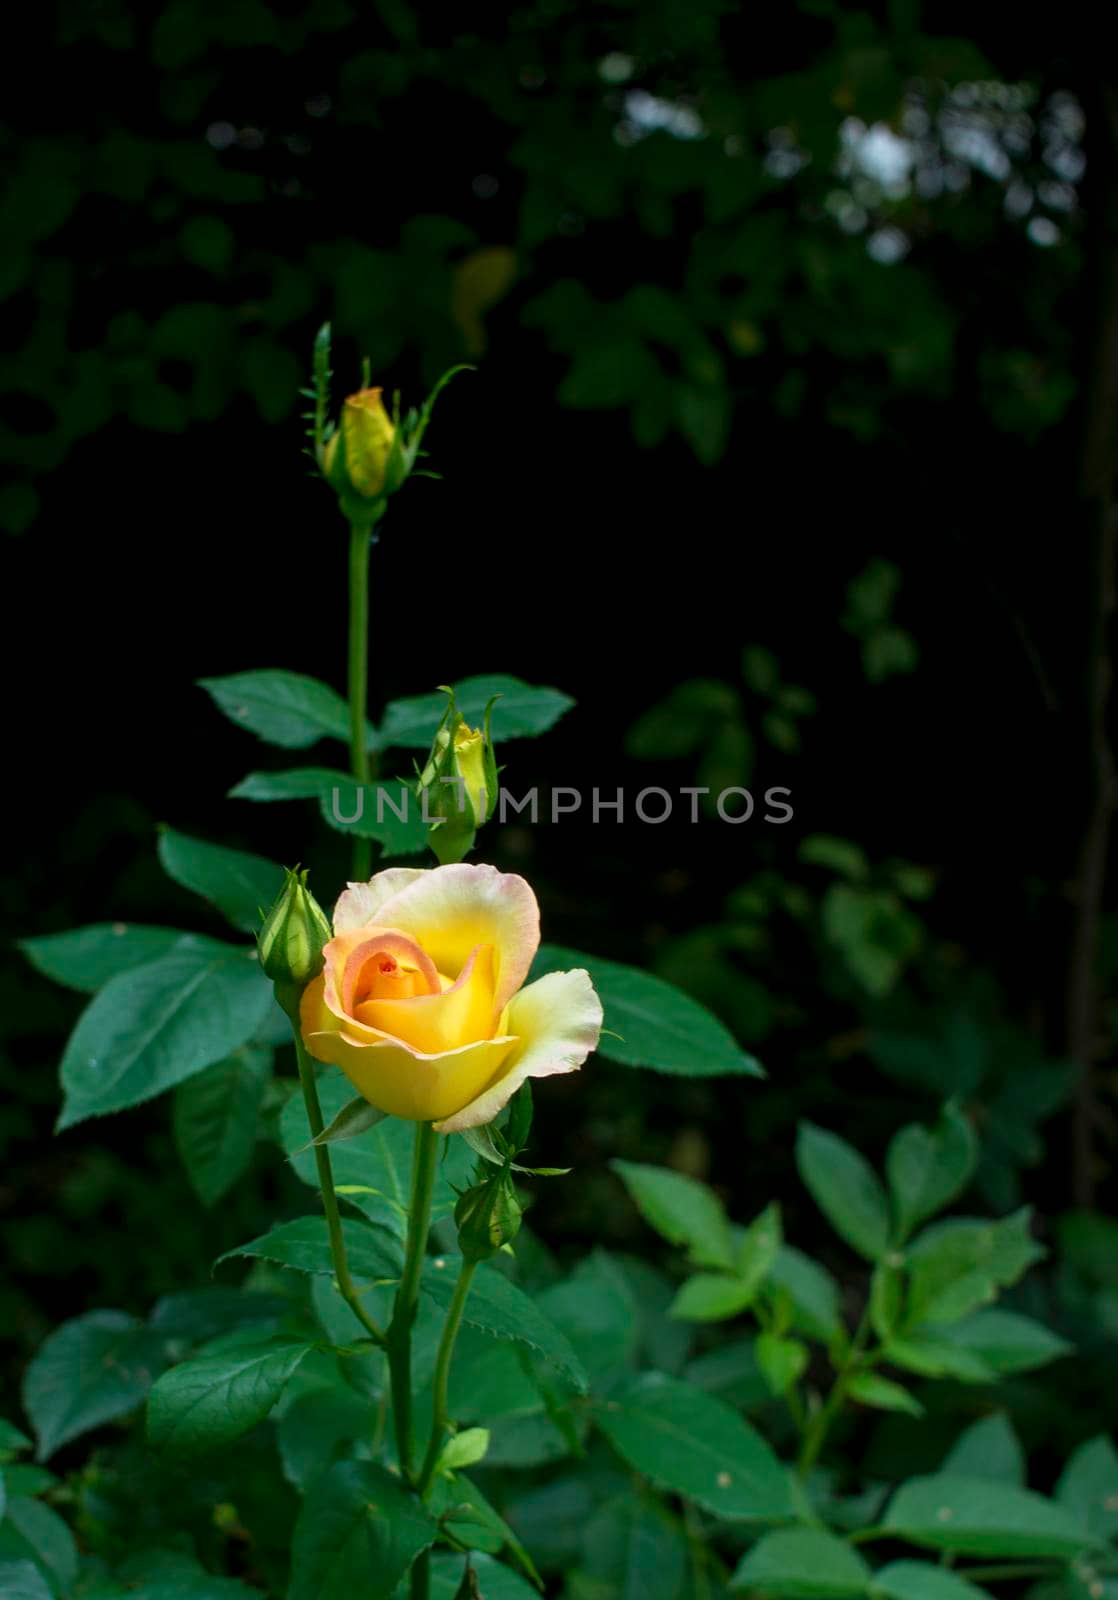 Close up beautiful orange rose flower blooming with dark background, shallow depth. High quality photo